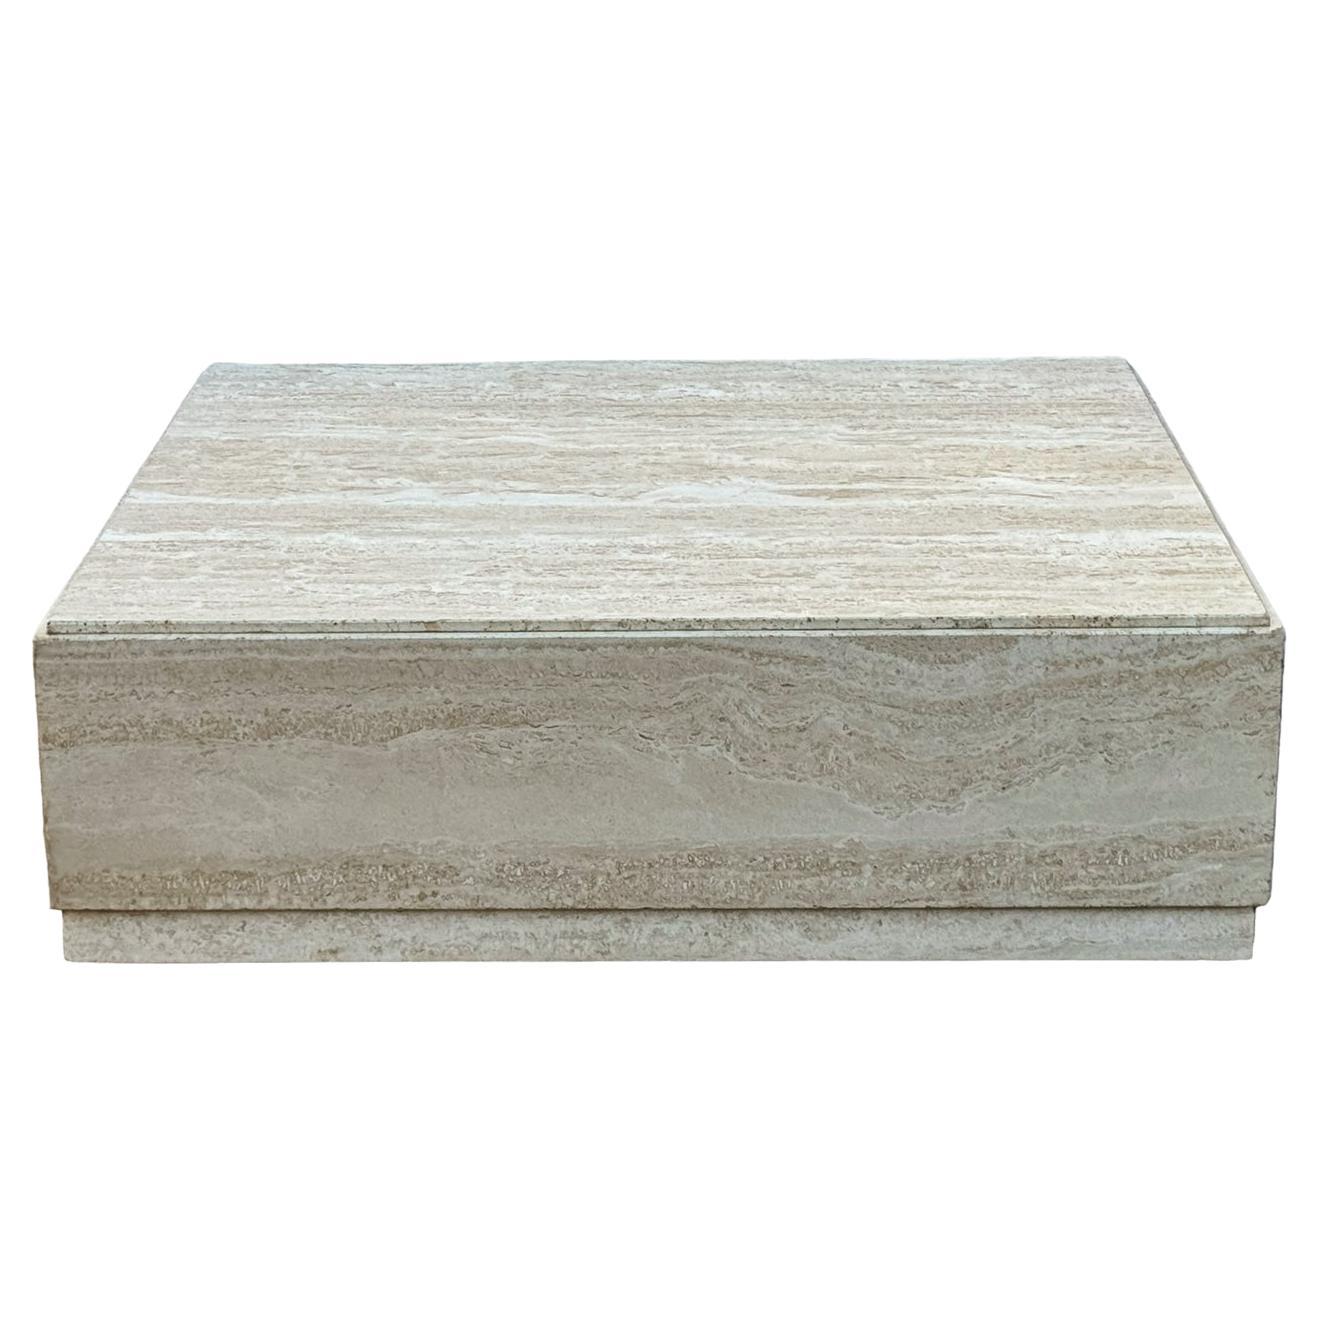 Low Midcentury Italian Modern Square Travertine Marble Cube Cocktail Table 